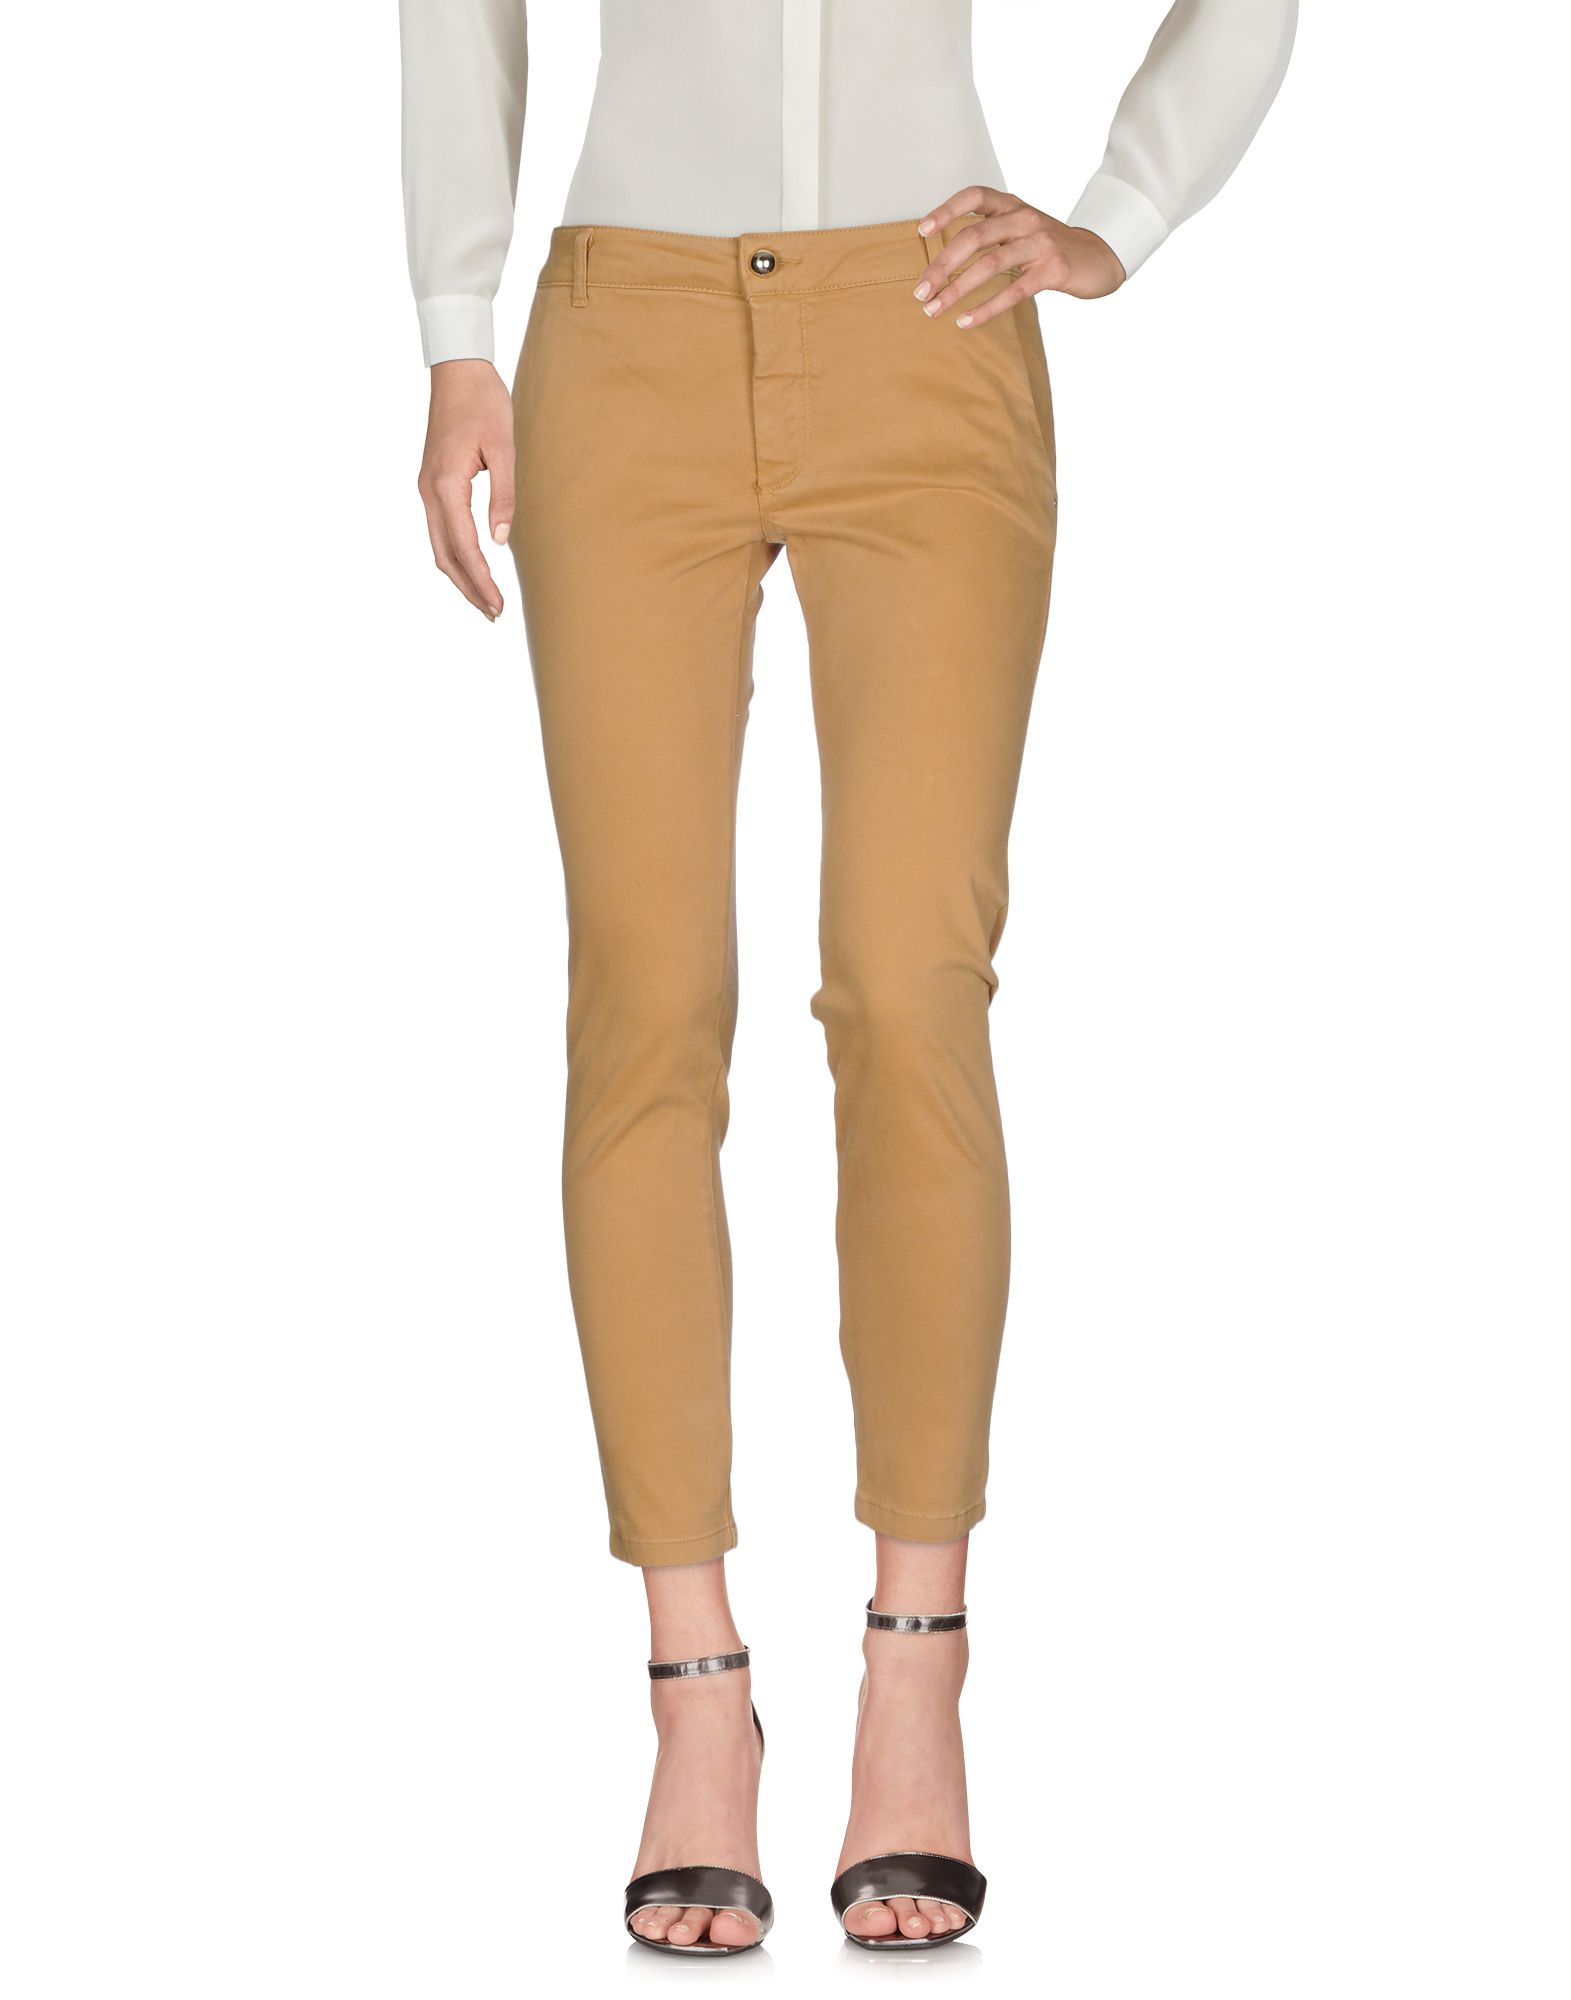 RB COLLECTION PRIV RB COLLECTION PRIV Casual pants from yoox.com ...